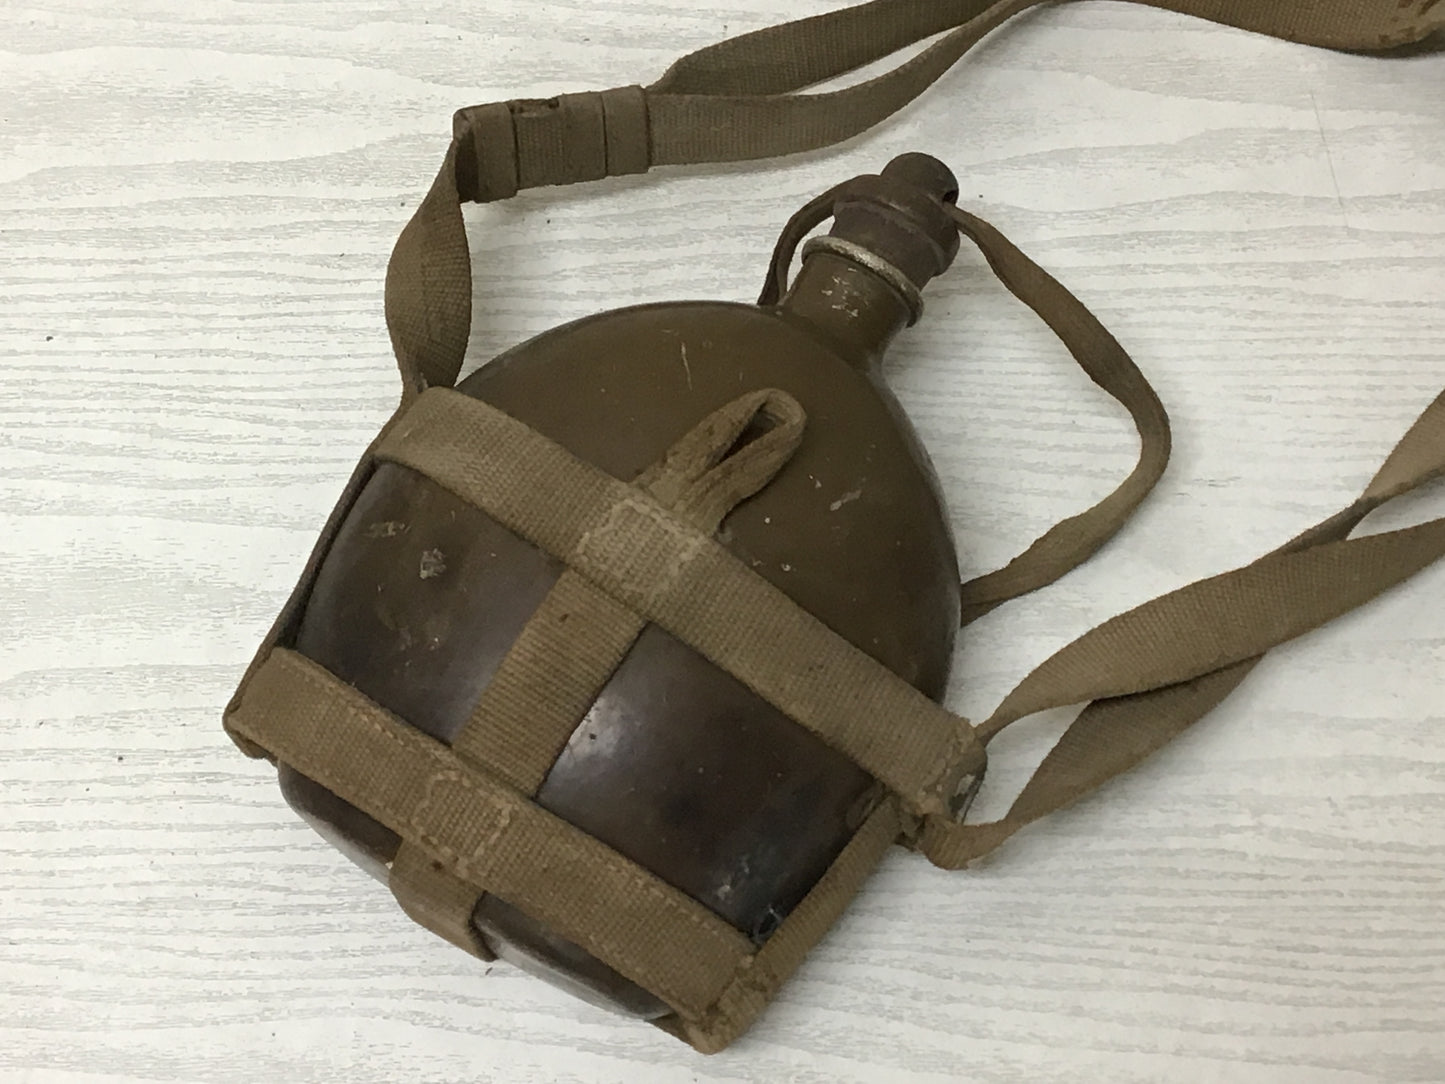 Y2372 Imperial Japan Army Canteen water bottle military gear Japan WW2 vintage